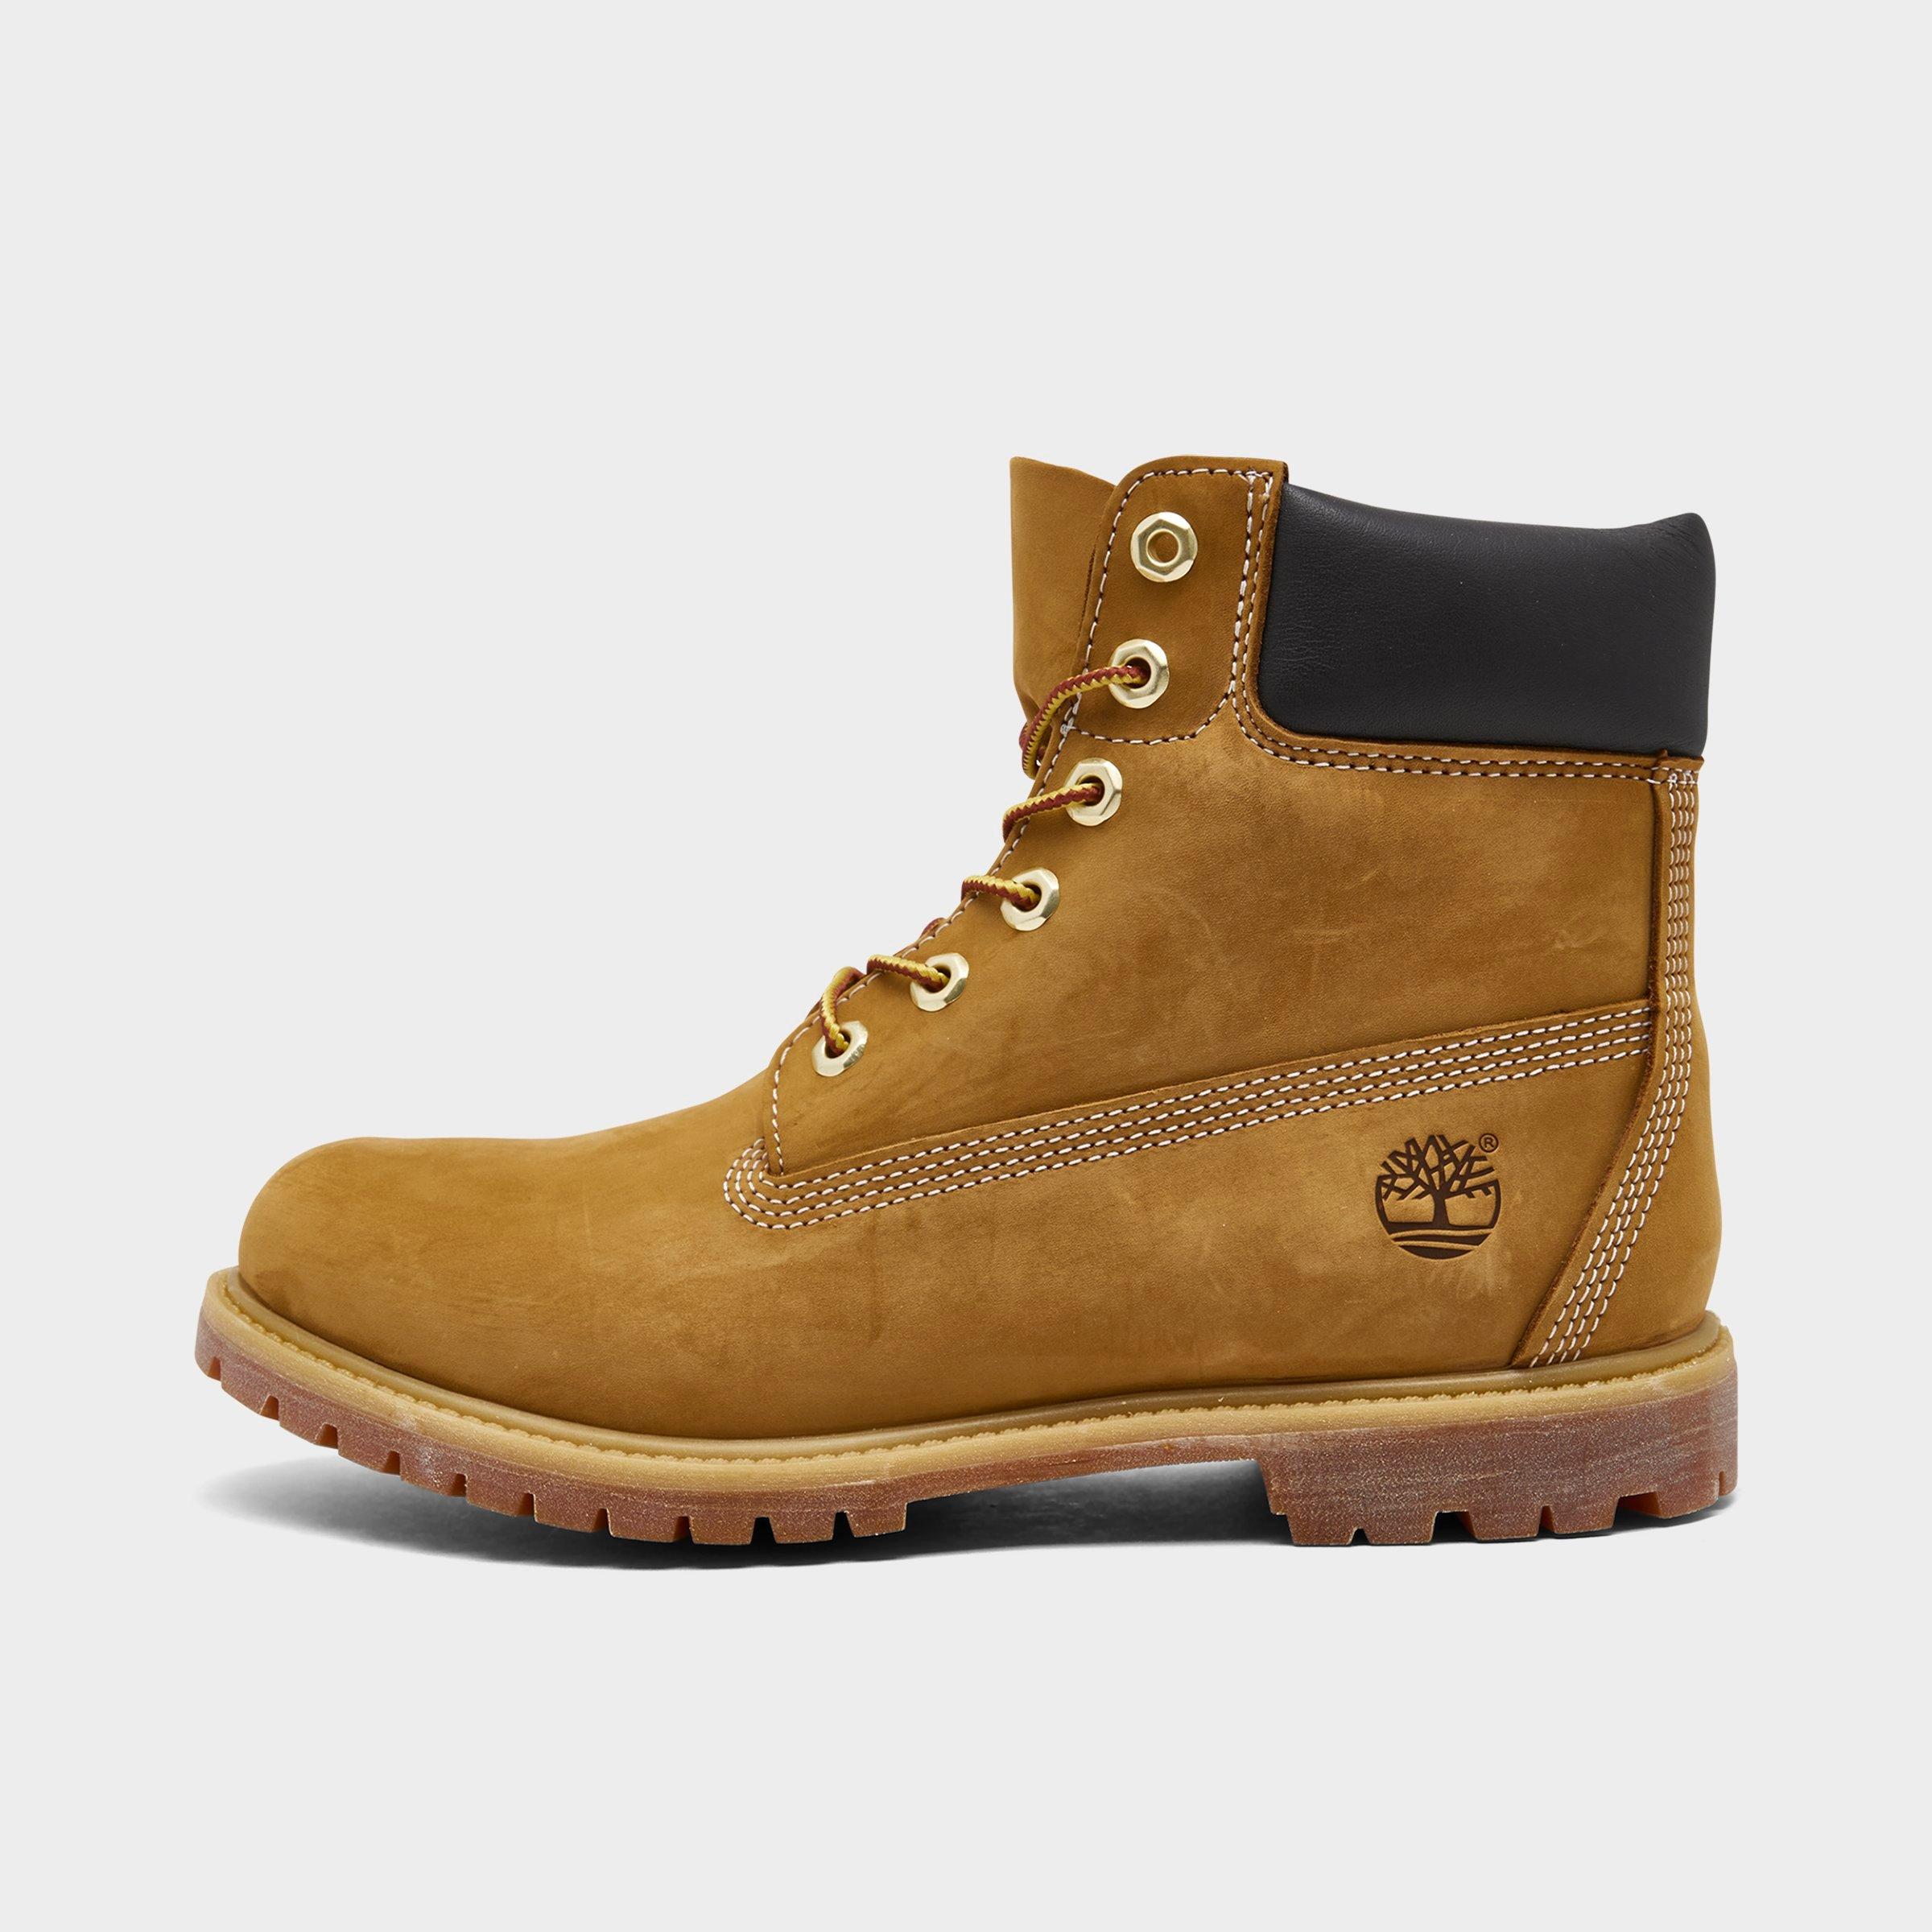 leather 6 inch timberland boots